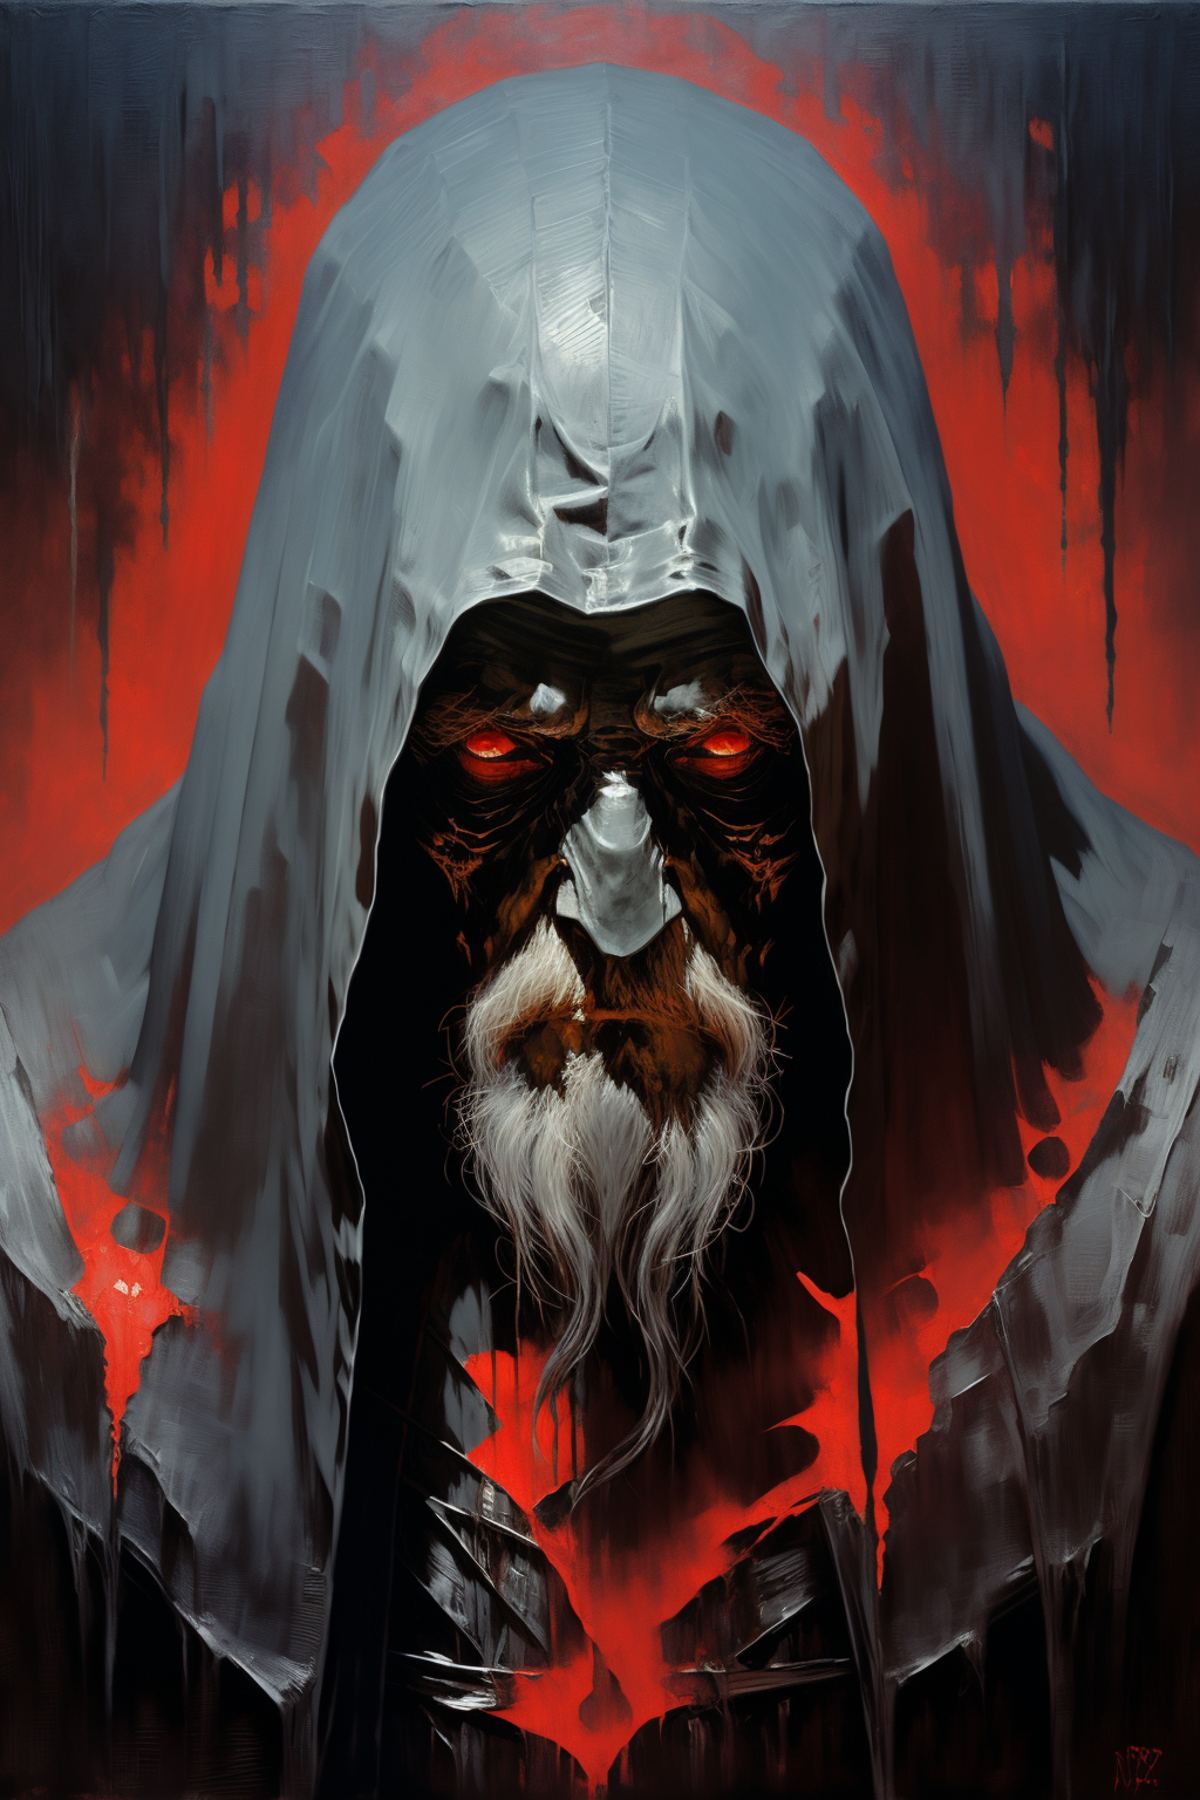 A painting of a bearded man wearing a white robe and hood with red eyes, giving a creepy vibe.